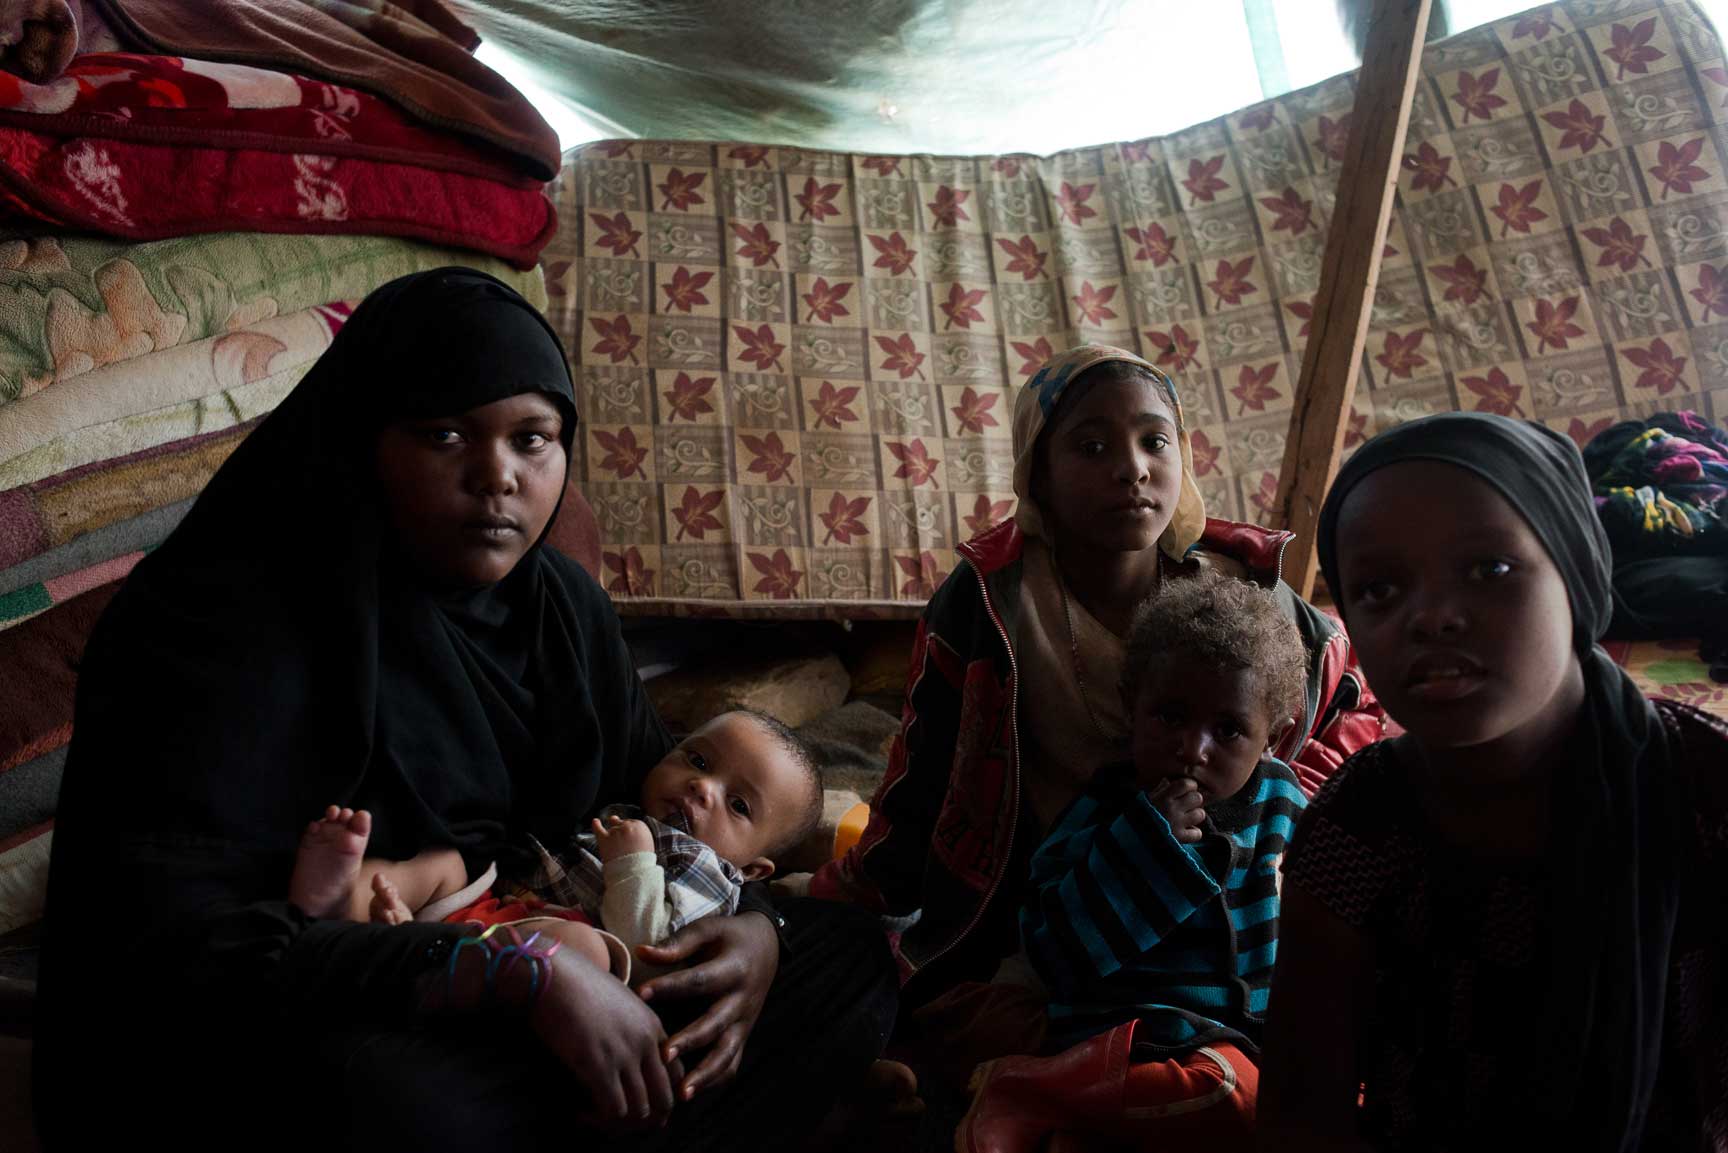 Children from a Yemeni family originally from the heavy-hit northern province of Sa'ada sit in their tent outside on July 7, 2015 in Amran, Yemen. They are members of Yemen's marginalized community, the Muhamashin, most of whom are not able to shelter in schools or family elsewhere.